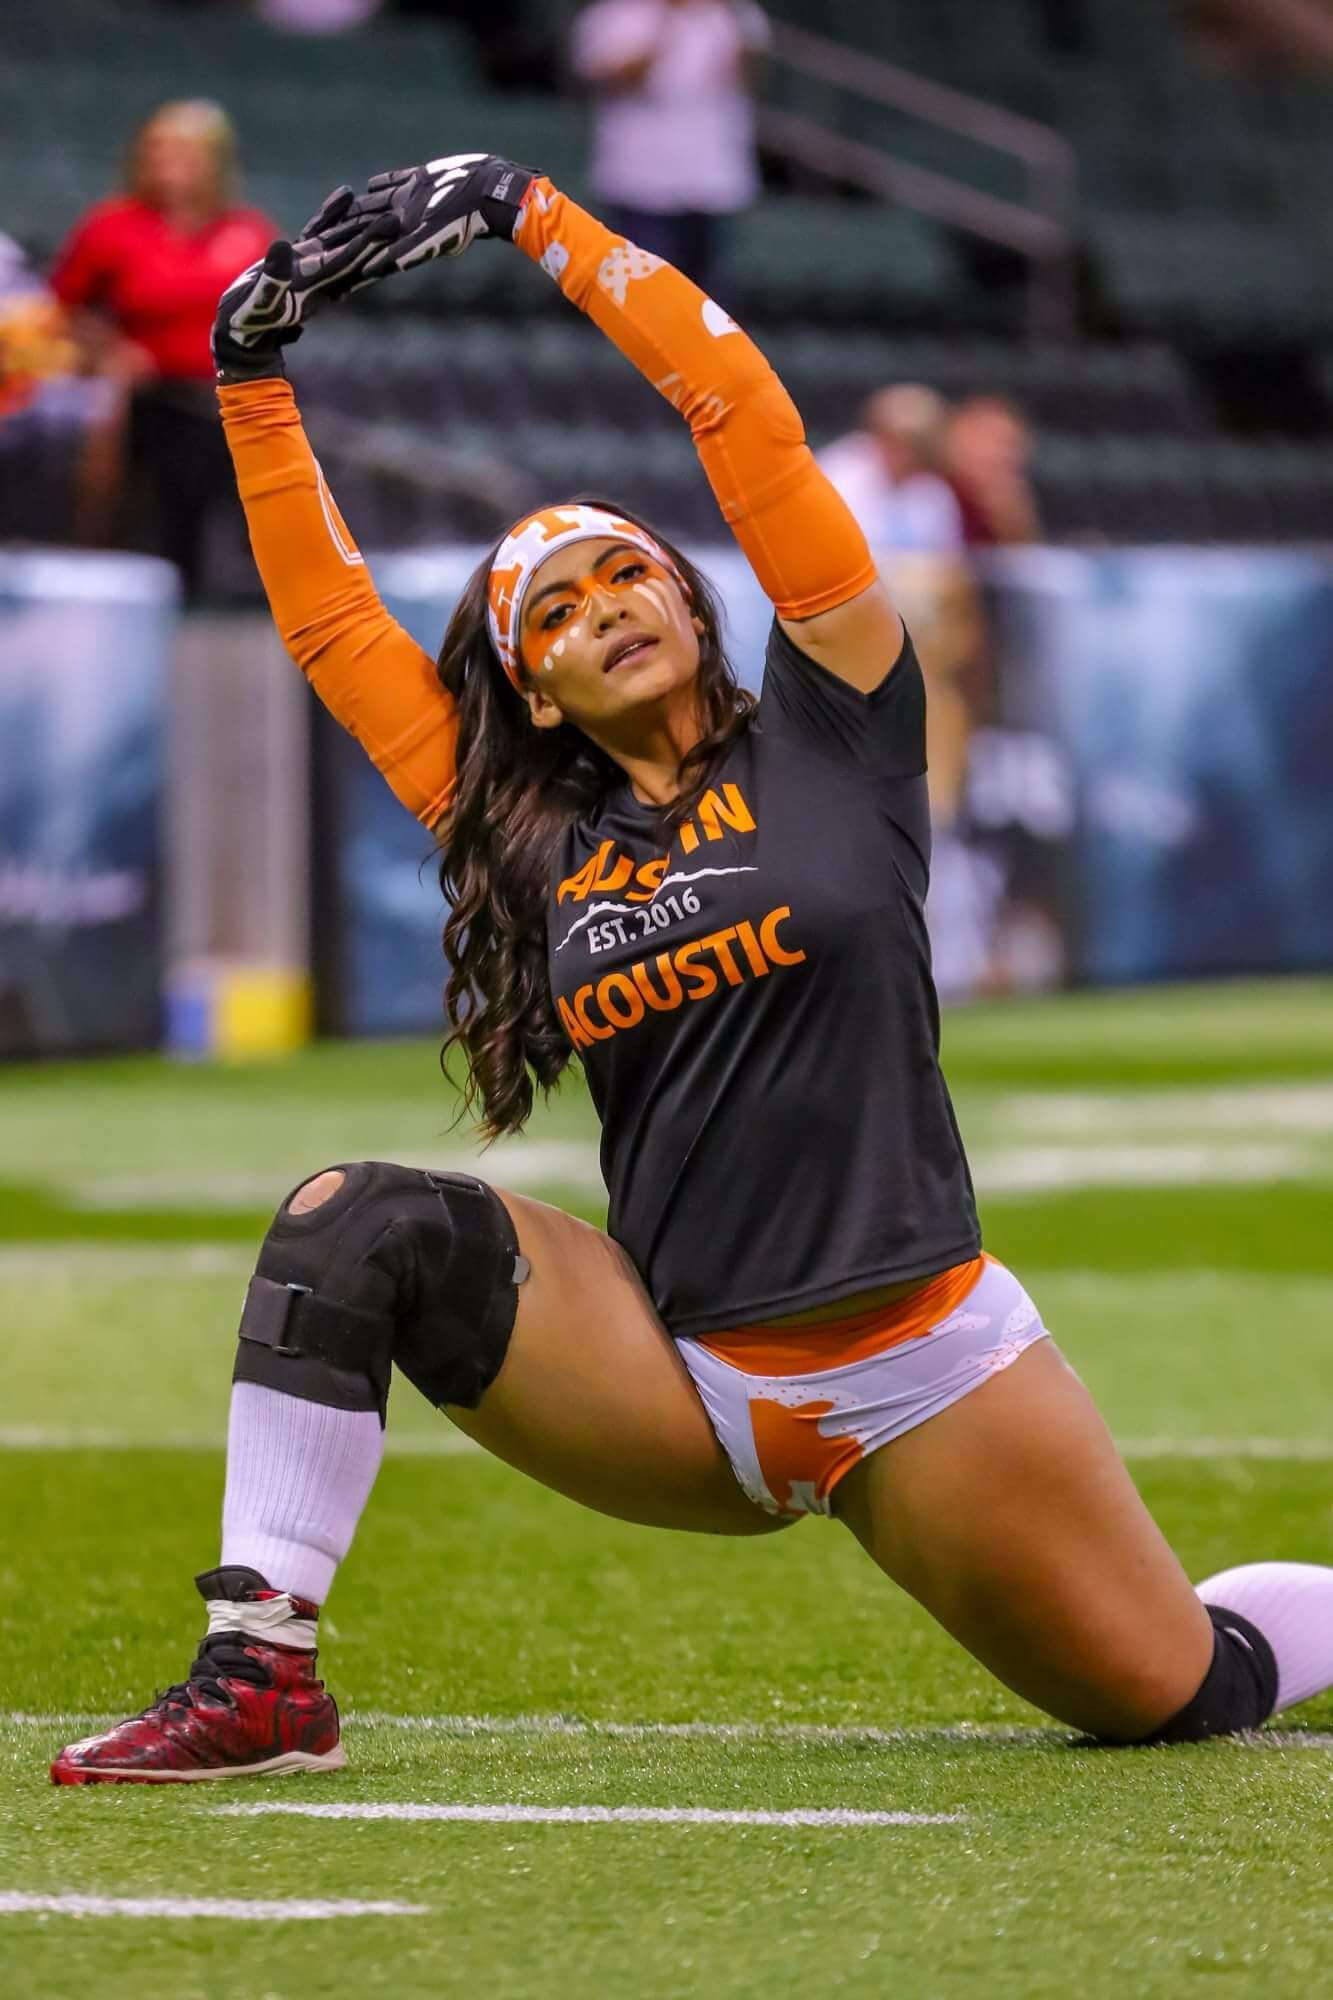 The Legends Football League Beautiful Women And Football, Need We Say Anymore! 155